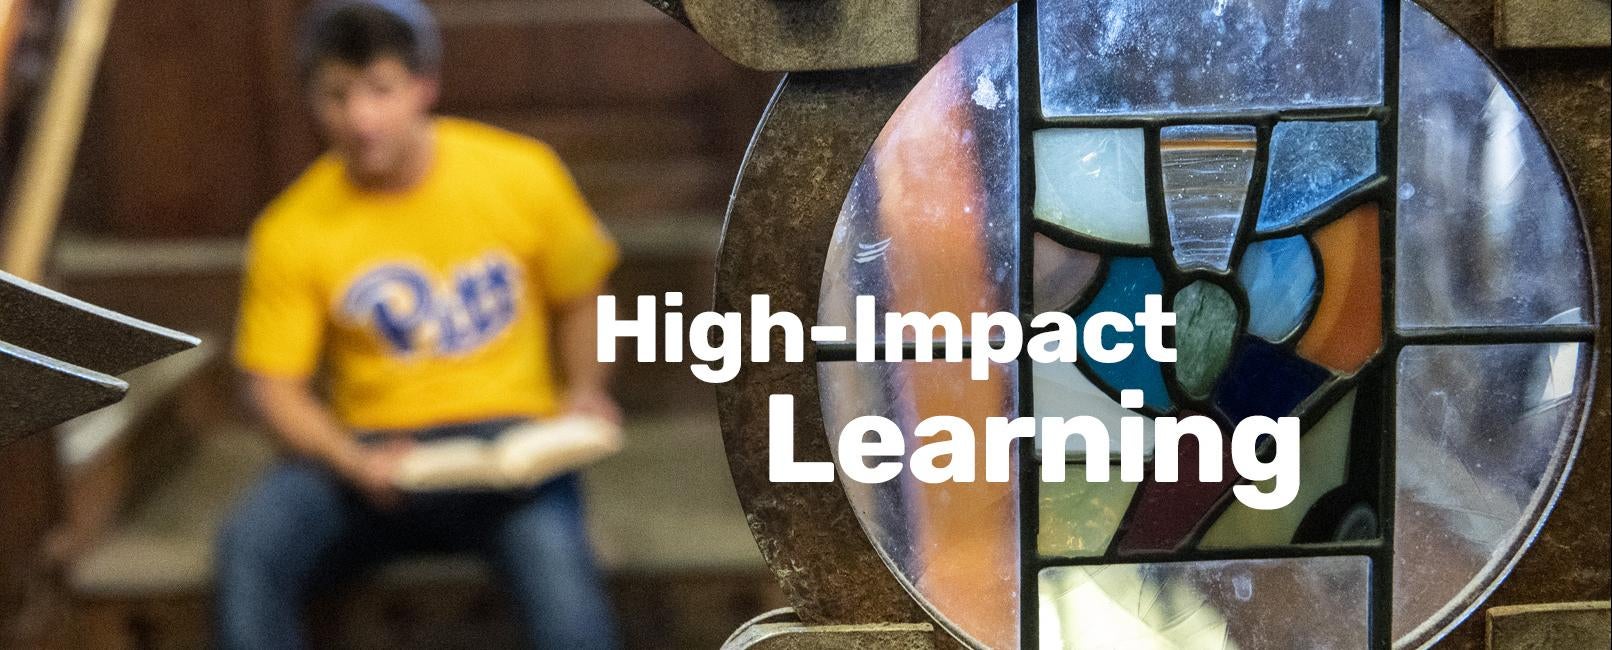 High-impact learning